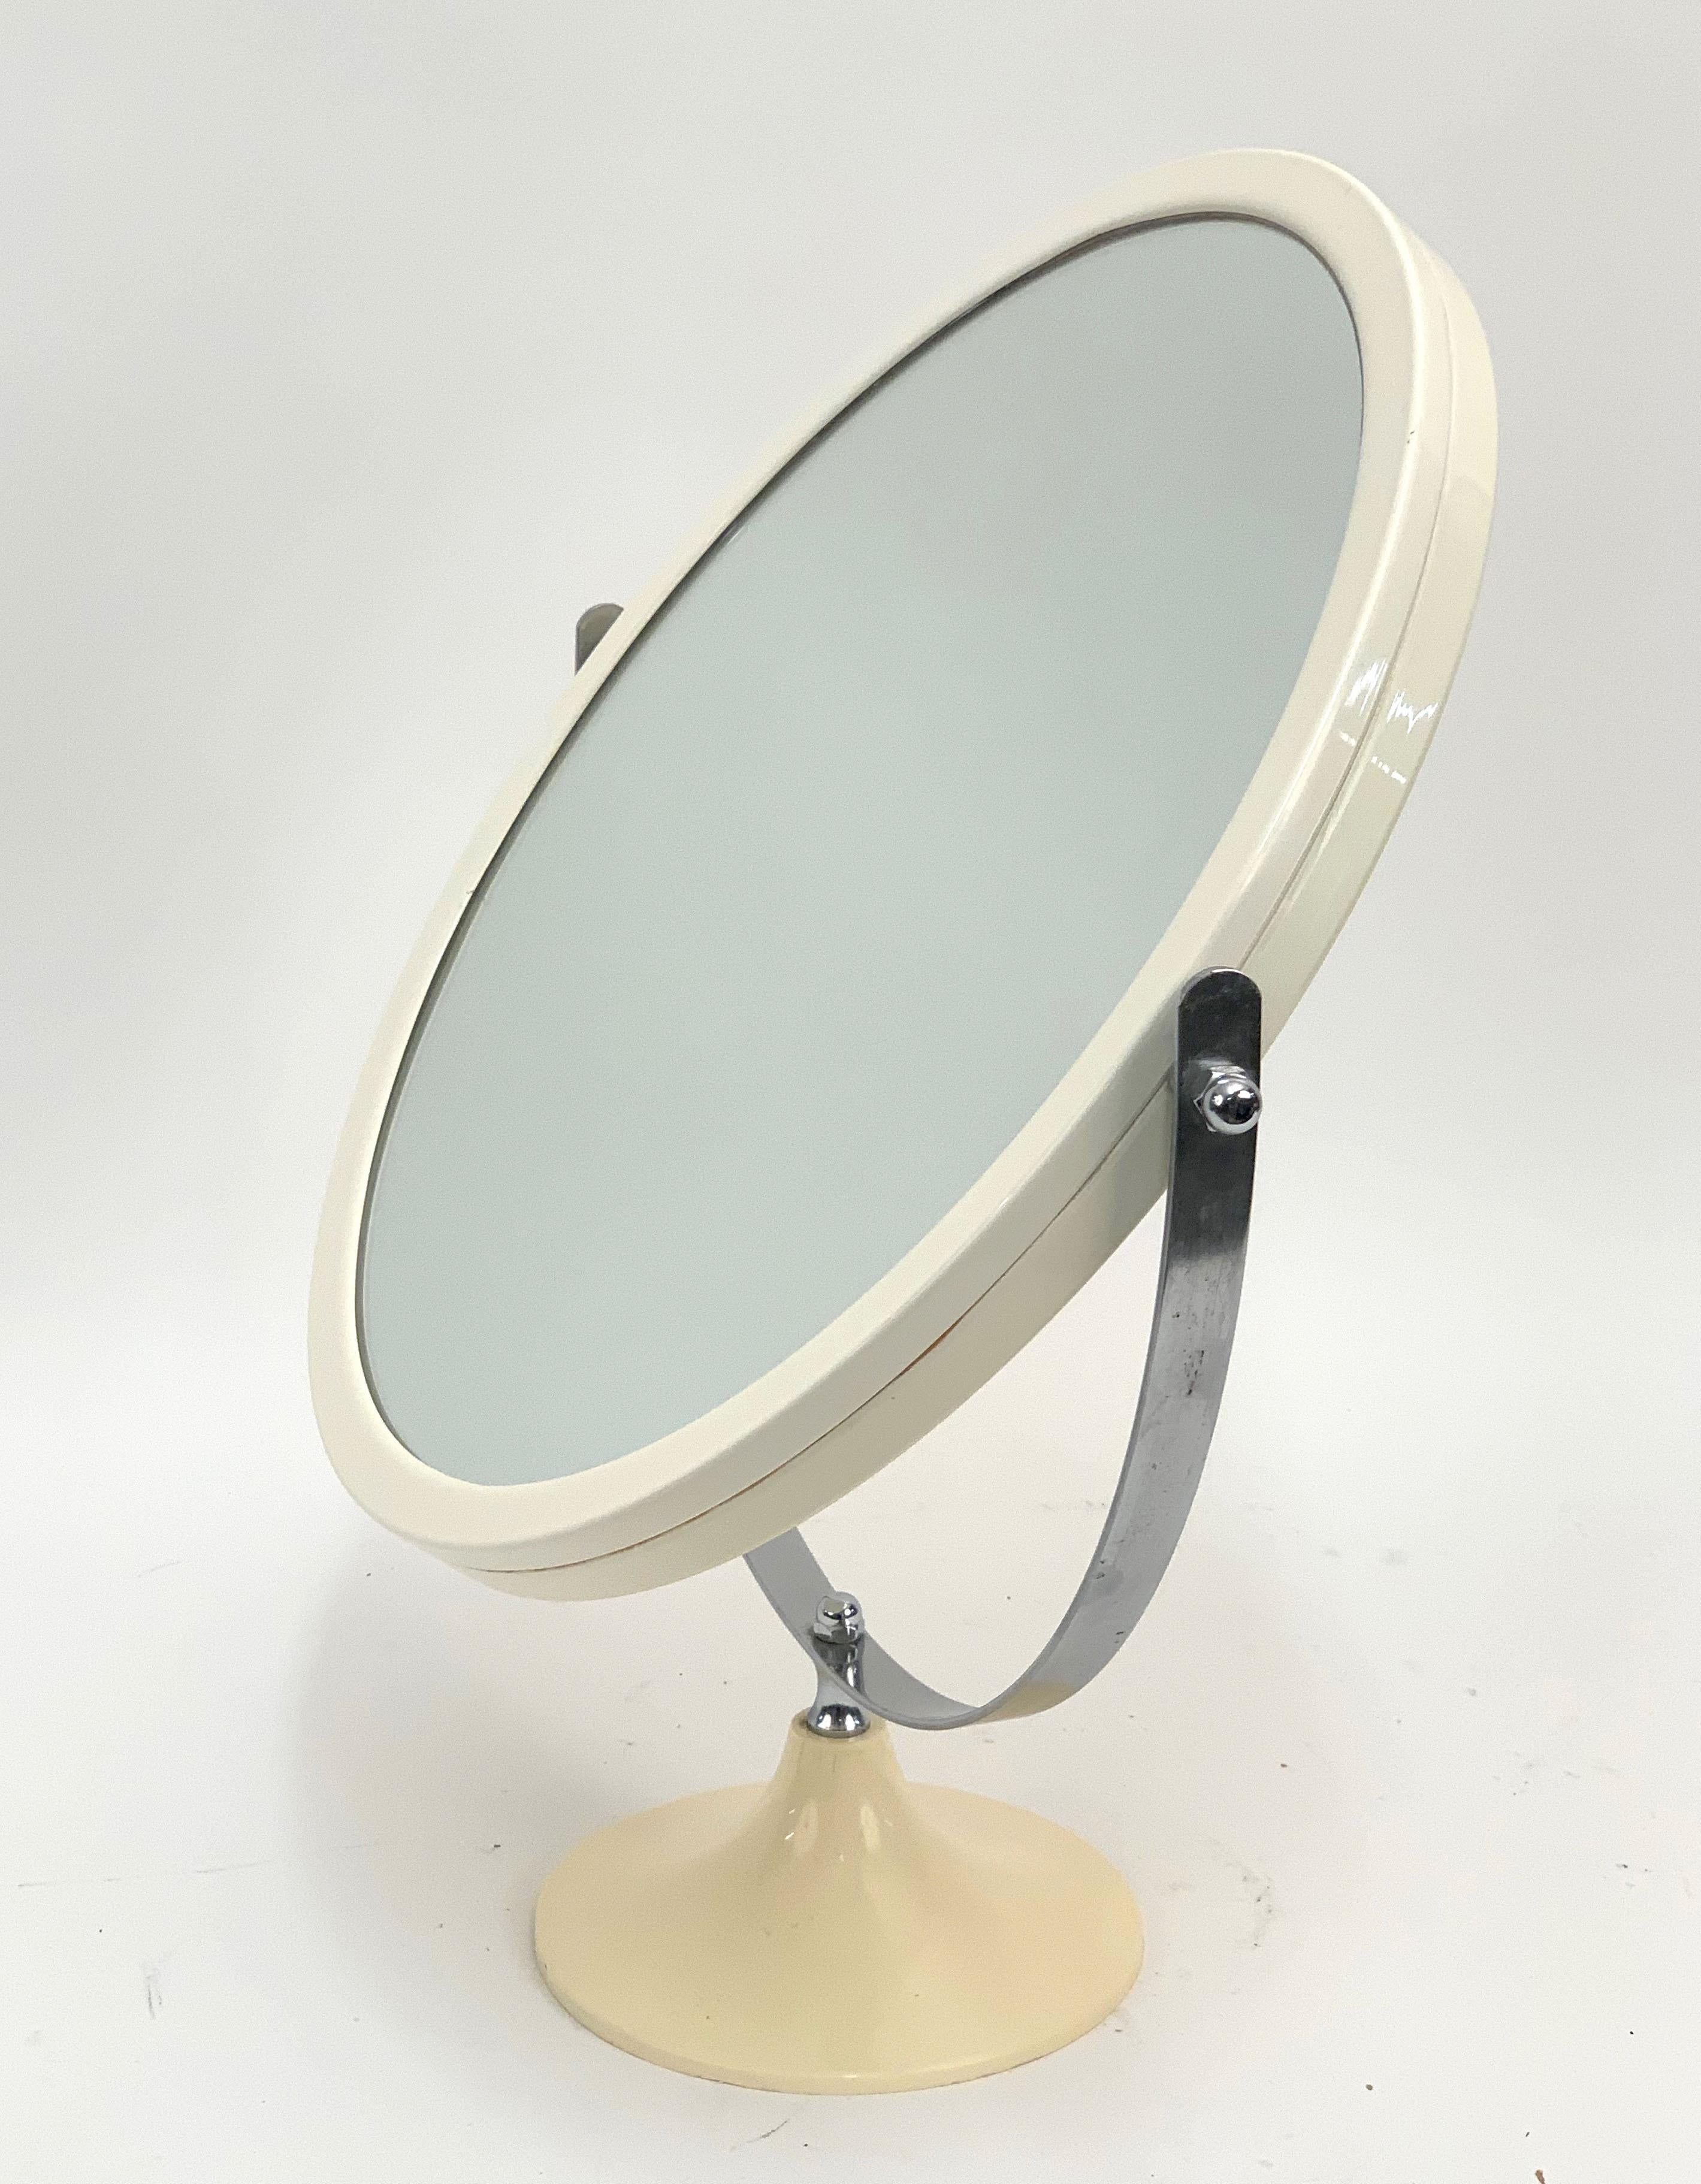 Midcentury Metal and White Plastic Round Italian Table Mirror, Italy, 1980s For Sale 4